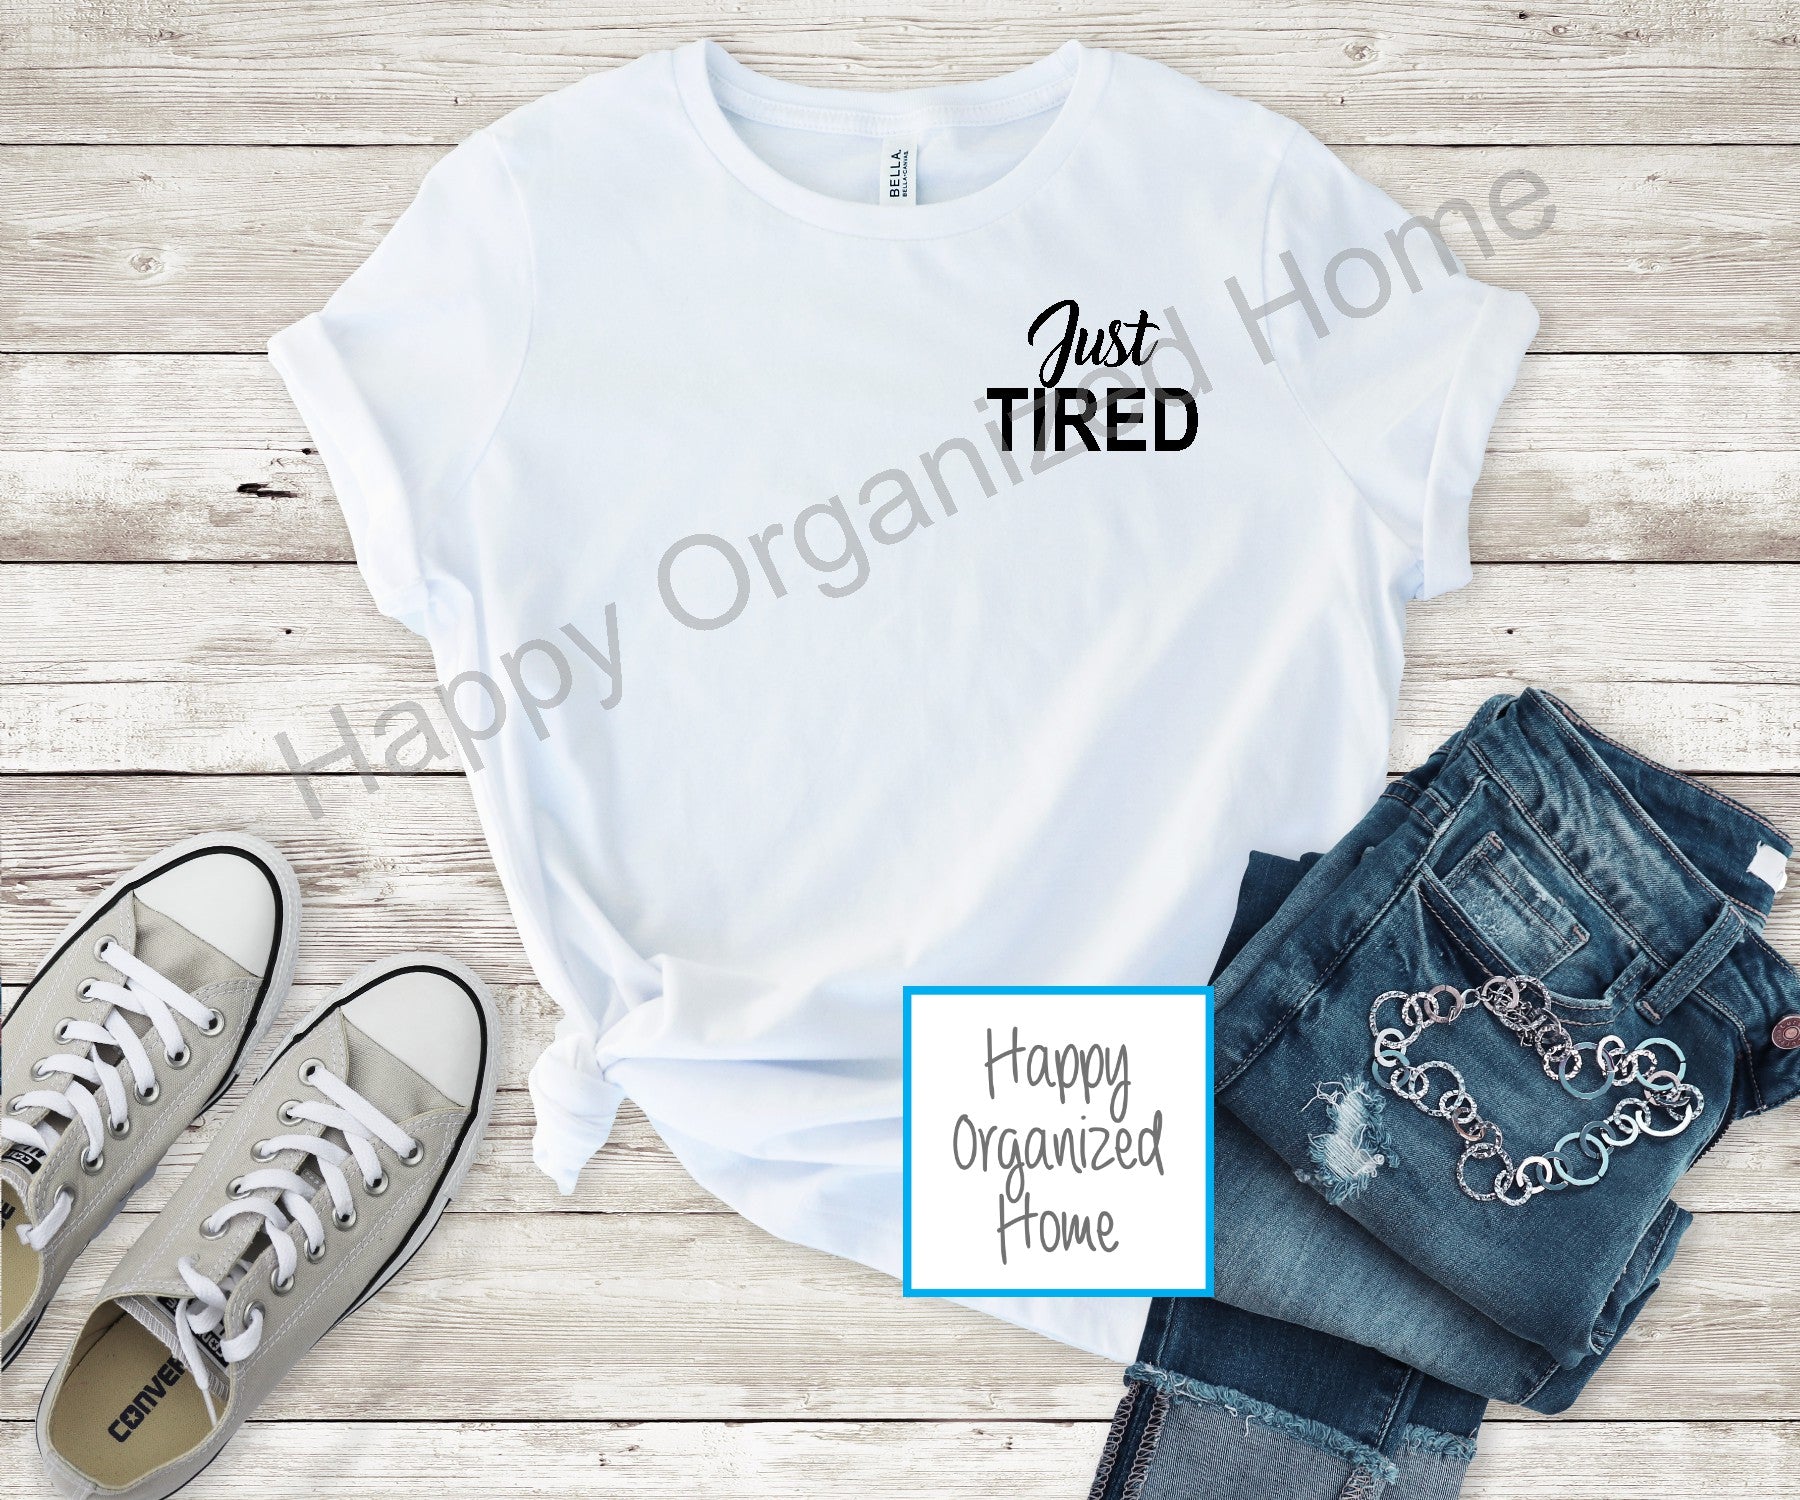 Just Tired - Ladies Relaxed Fit T-shirt